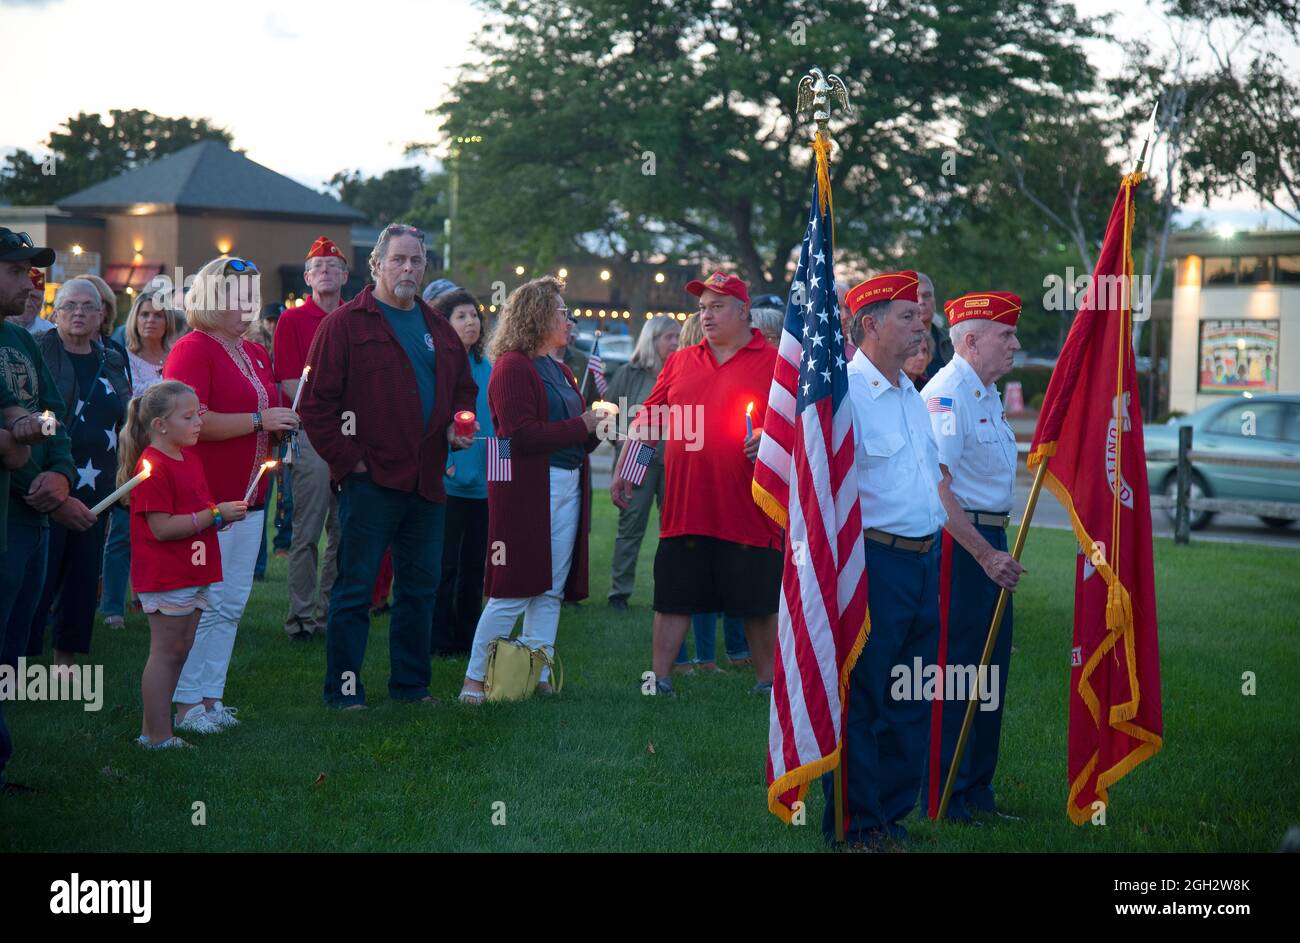 A candlelight vigil in Hyannis, Massachusetts (USA) for the fallen service members in Afghanistan. Stock Photo